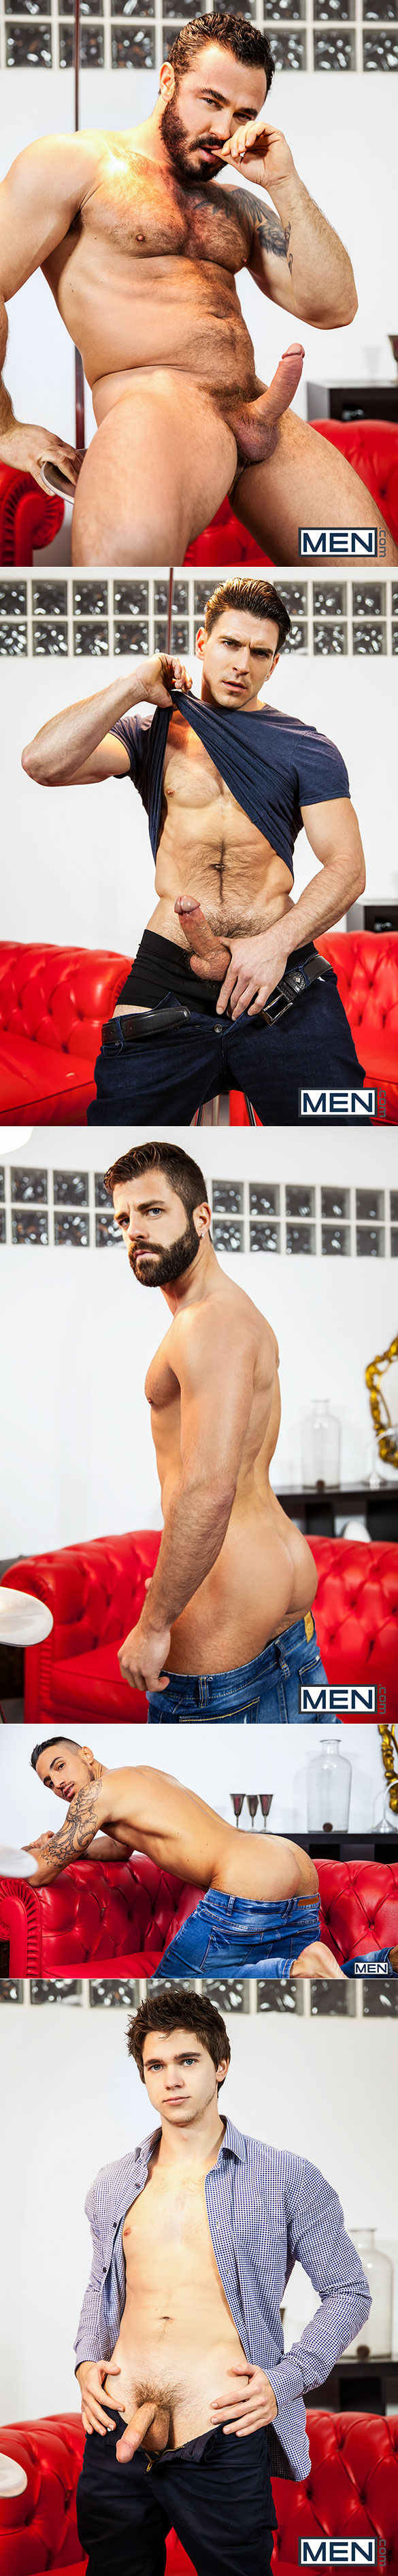 Men.com: Hector de Silva, Jessy Ares, Klein Kerr, Paddy O'Brian and Will Braun's orgy in "Lost Boy, Part 3"